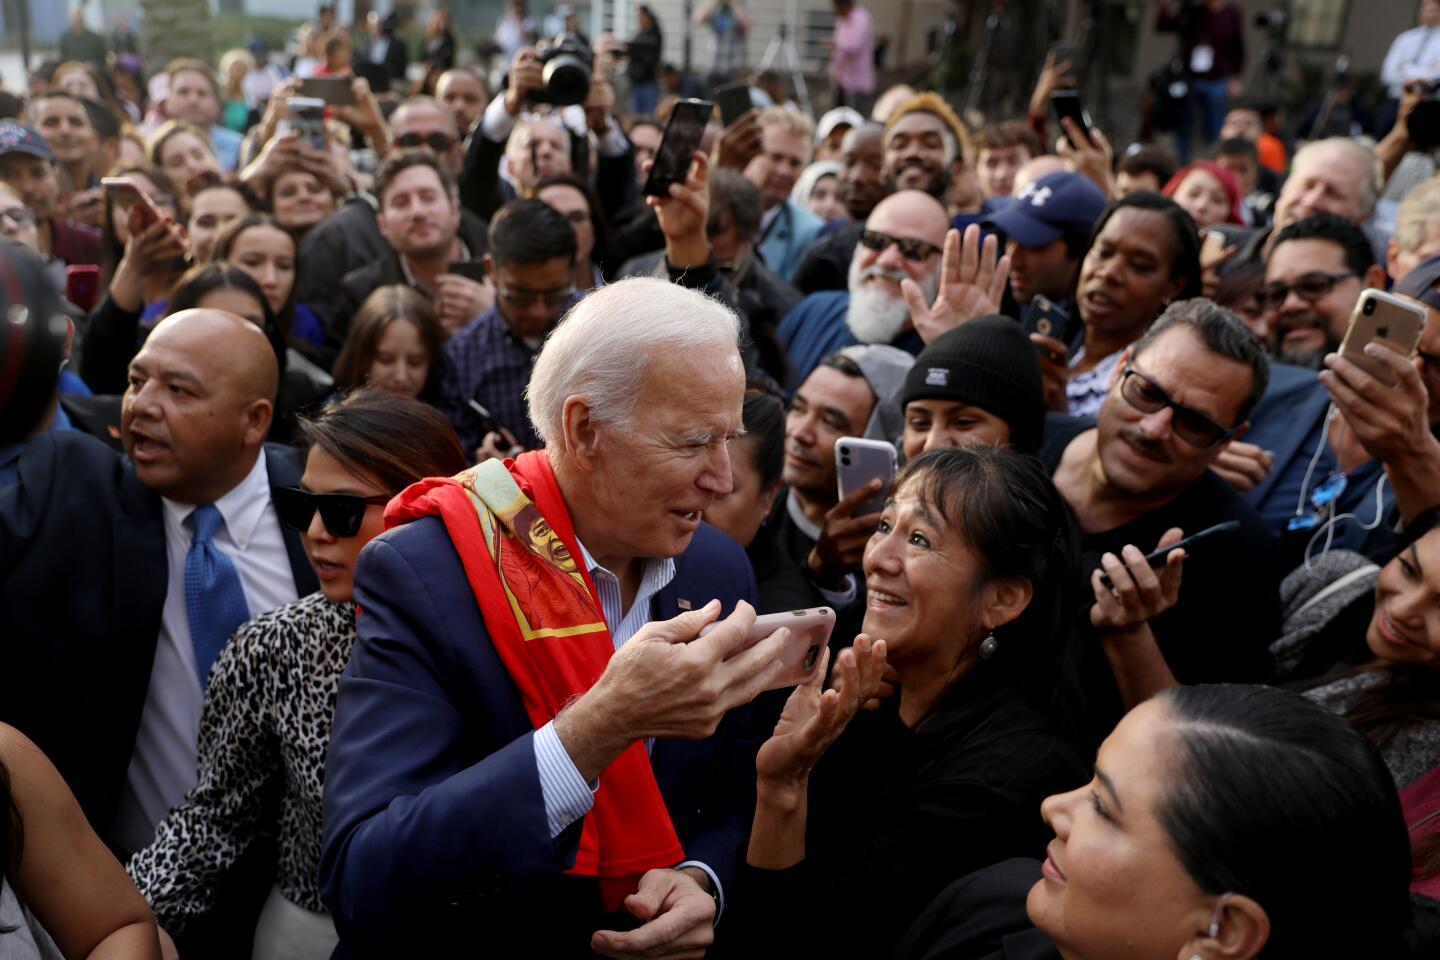 LOS ANGELES, CALIF. -- THURSDAY, NOVEMBER 14, 2019: Former Vice President Joe Biden greets constituents after speaking at Los Angeles Trade Technical College in Los Angeles, Calif., on Nov. 14, 2019. (Gary Coronado / Los Angeles Times)